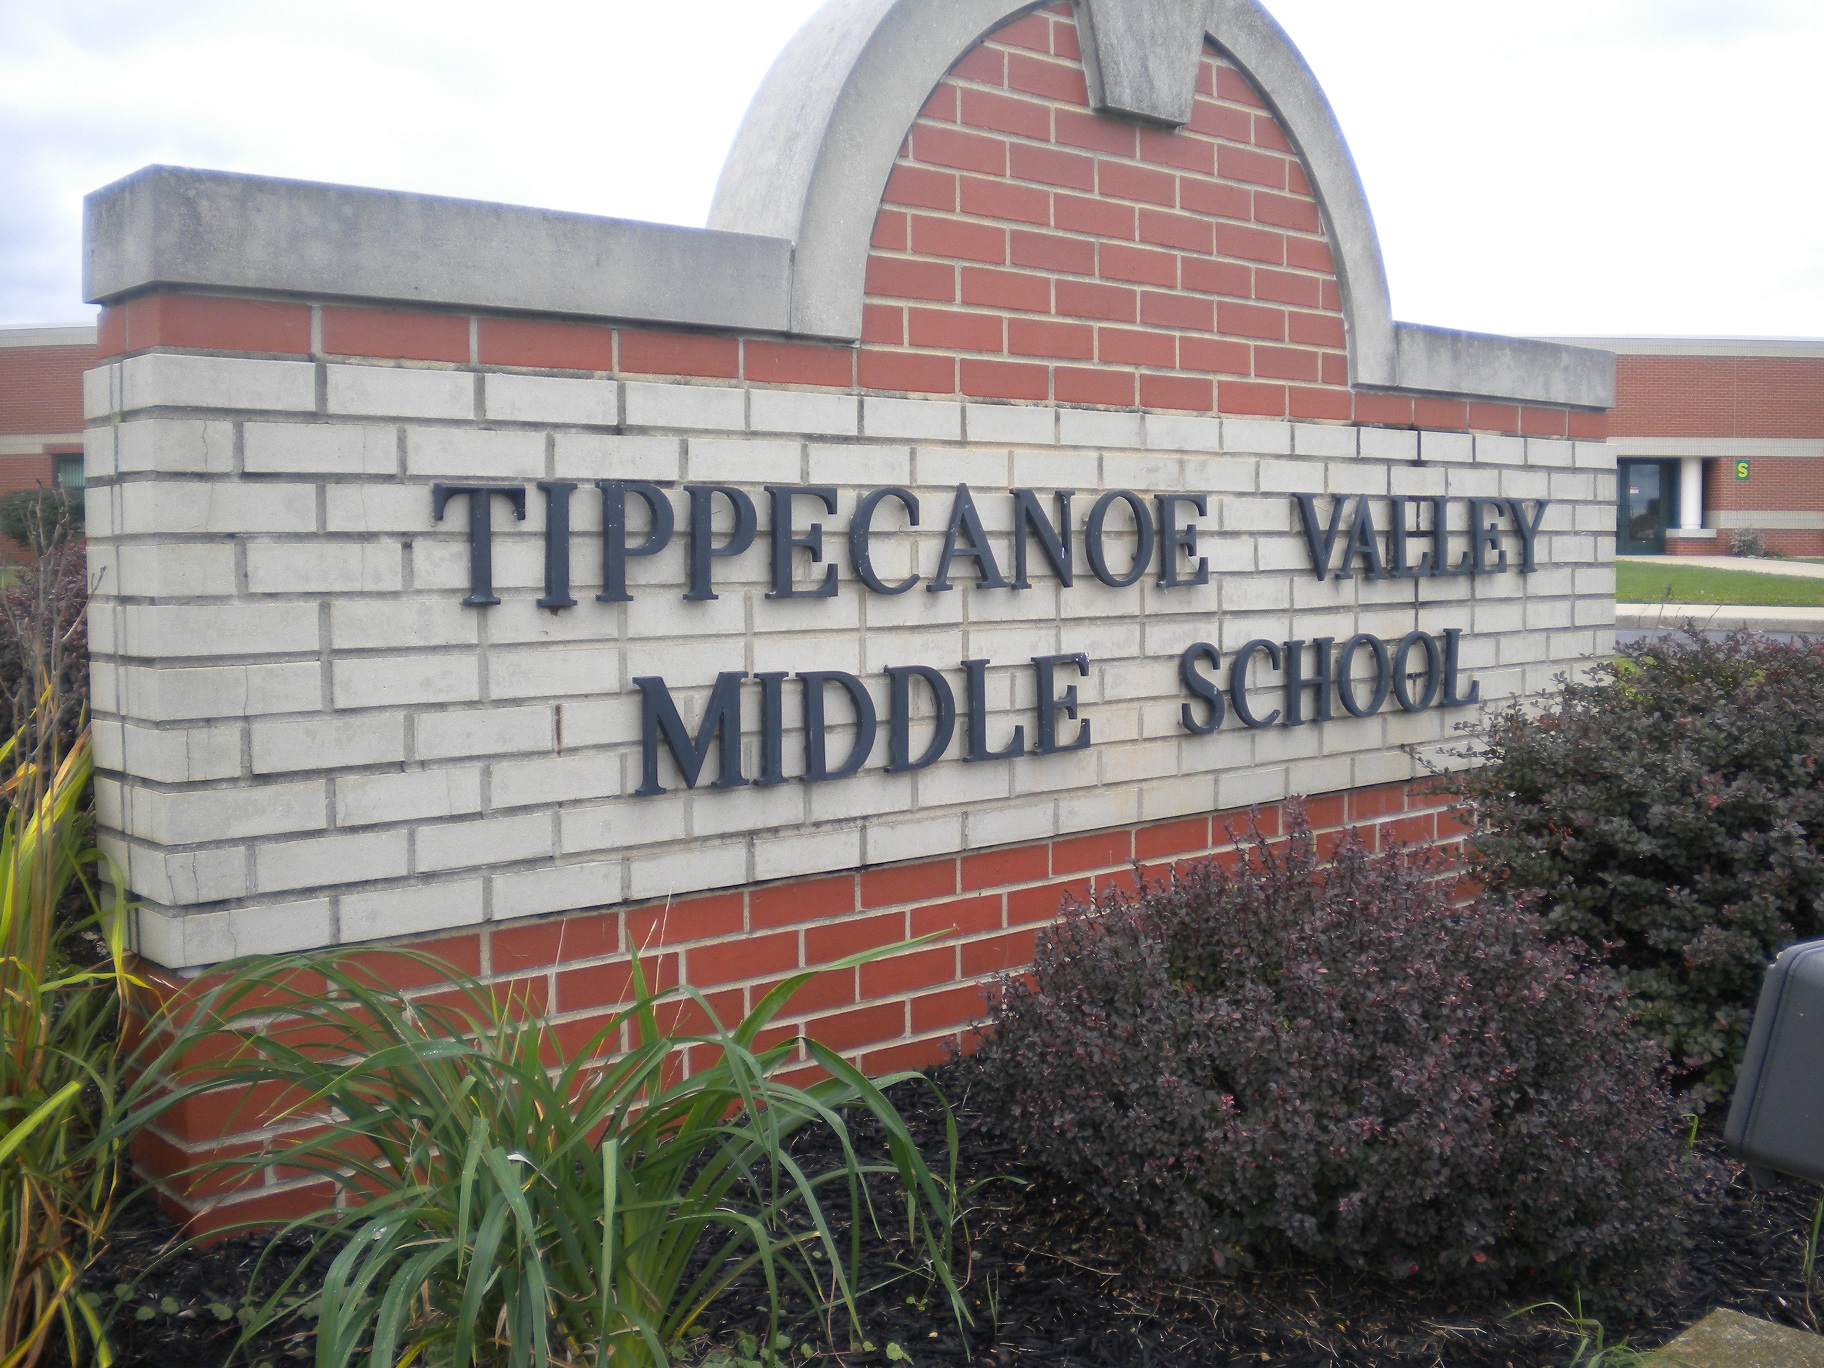 Thumbnail for the post titled: Tippecanoe Valley Middle School to establish coed soccer team